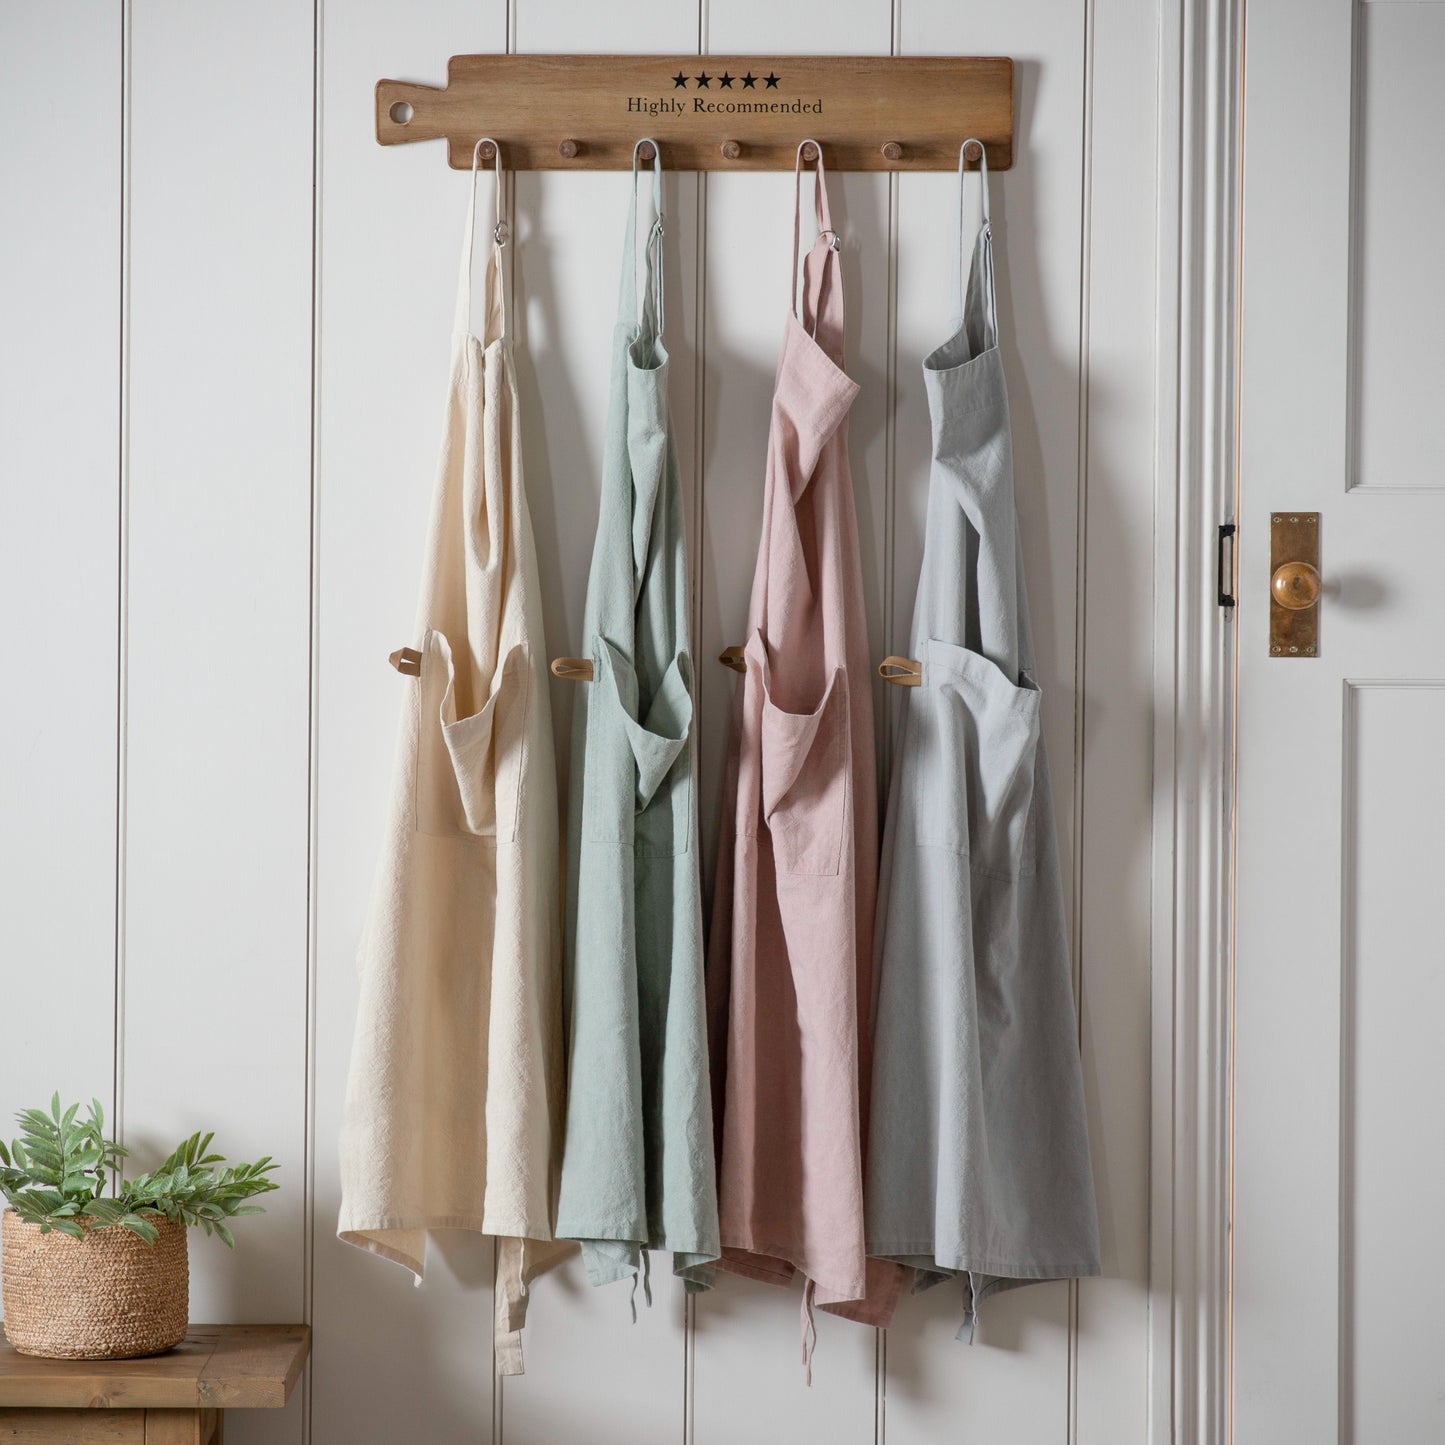 Four Stonewashed Apron Sage hanging on wooden wall from Kikiathome.co.uk, home furniture and interior decor.